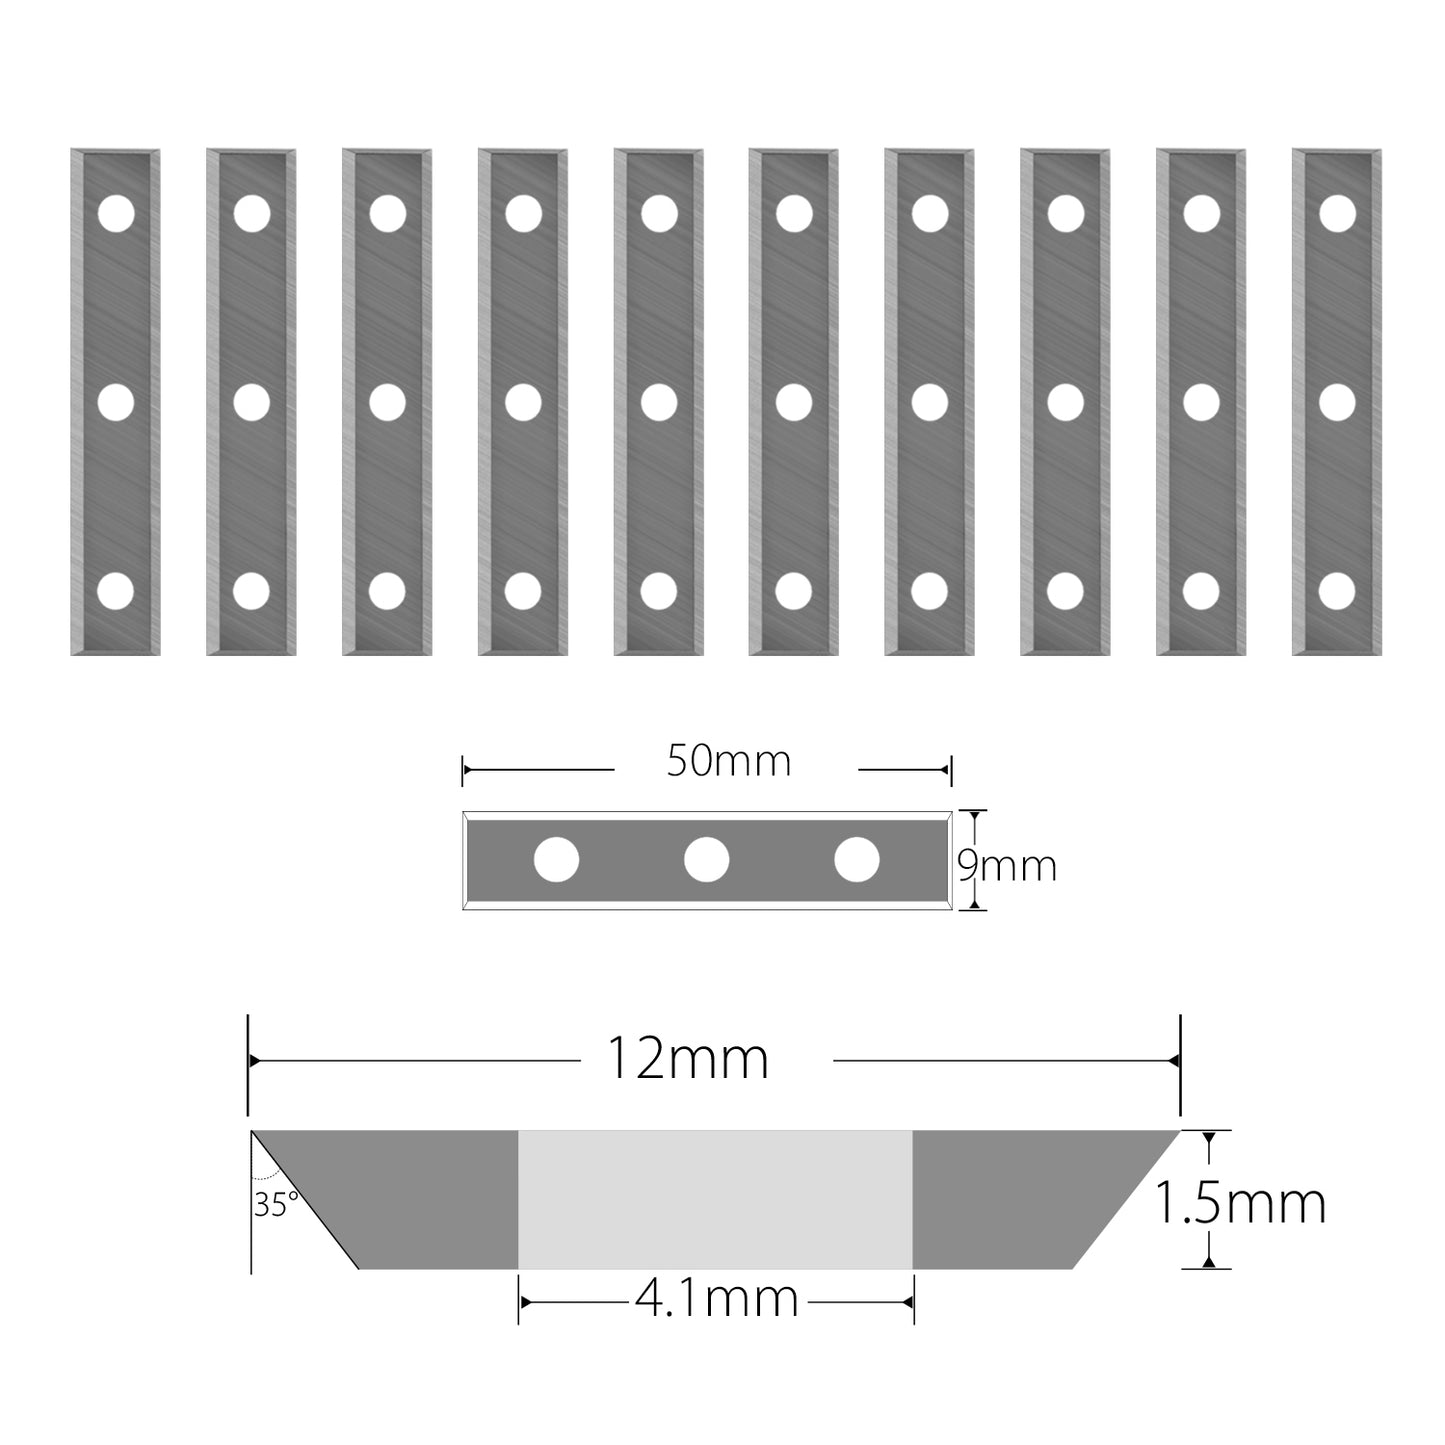 Woodworking Reversible Tungsten Carbide Insert Cutter 50x9x1.7mm-35° Z=4 Indexable Knife Replacement Blade for Handheld Scraper or Milling  Cutter Heads